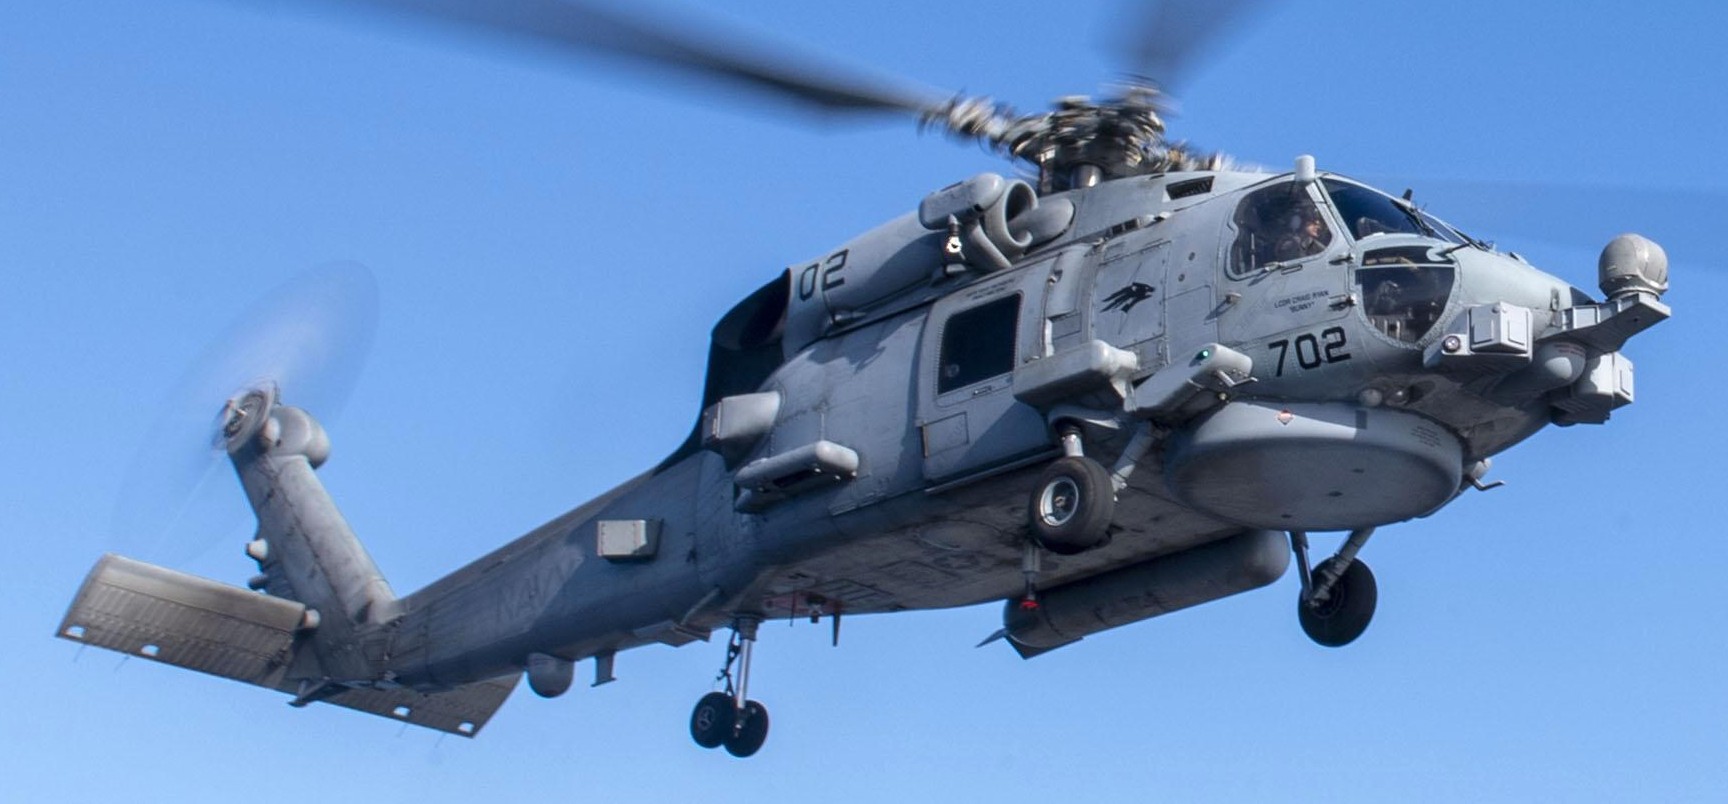 hsm-75 wolf pack helicopter maritime strike squadron mh-60r seahawk cg-52 uss bunker hill 44